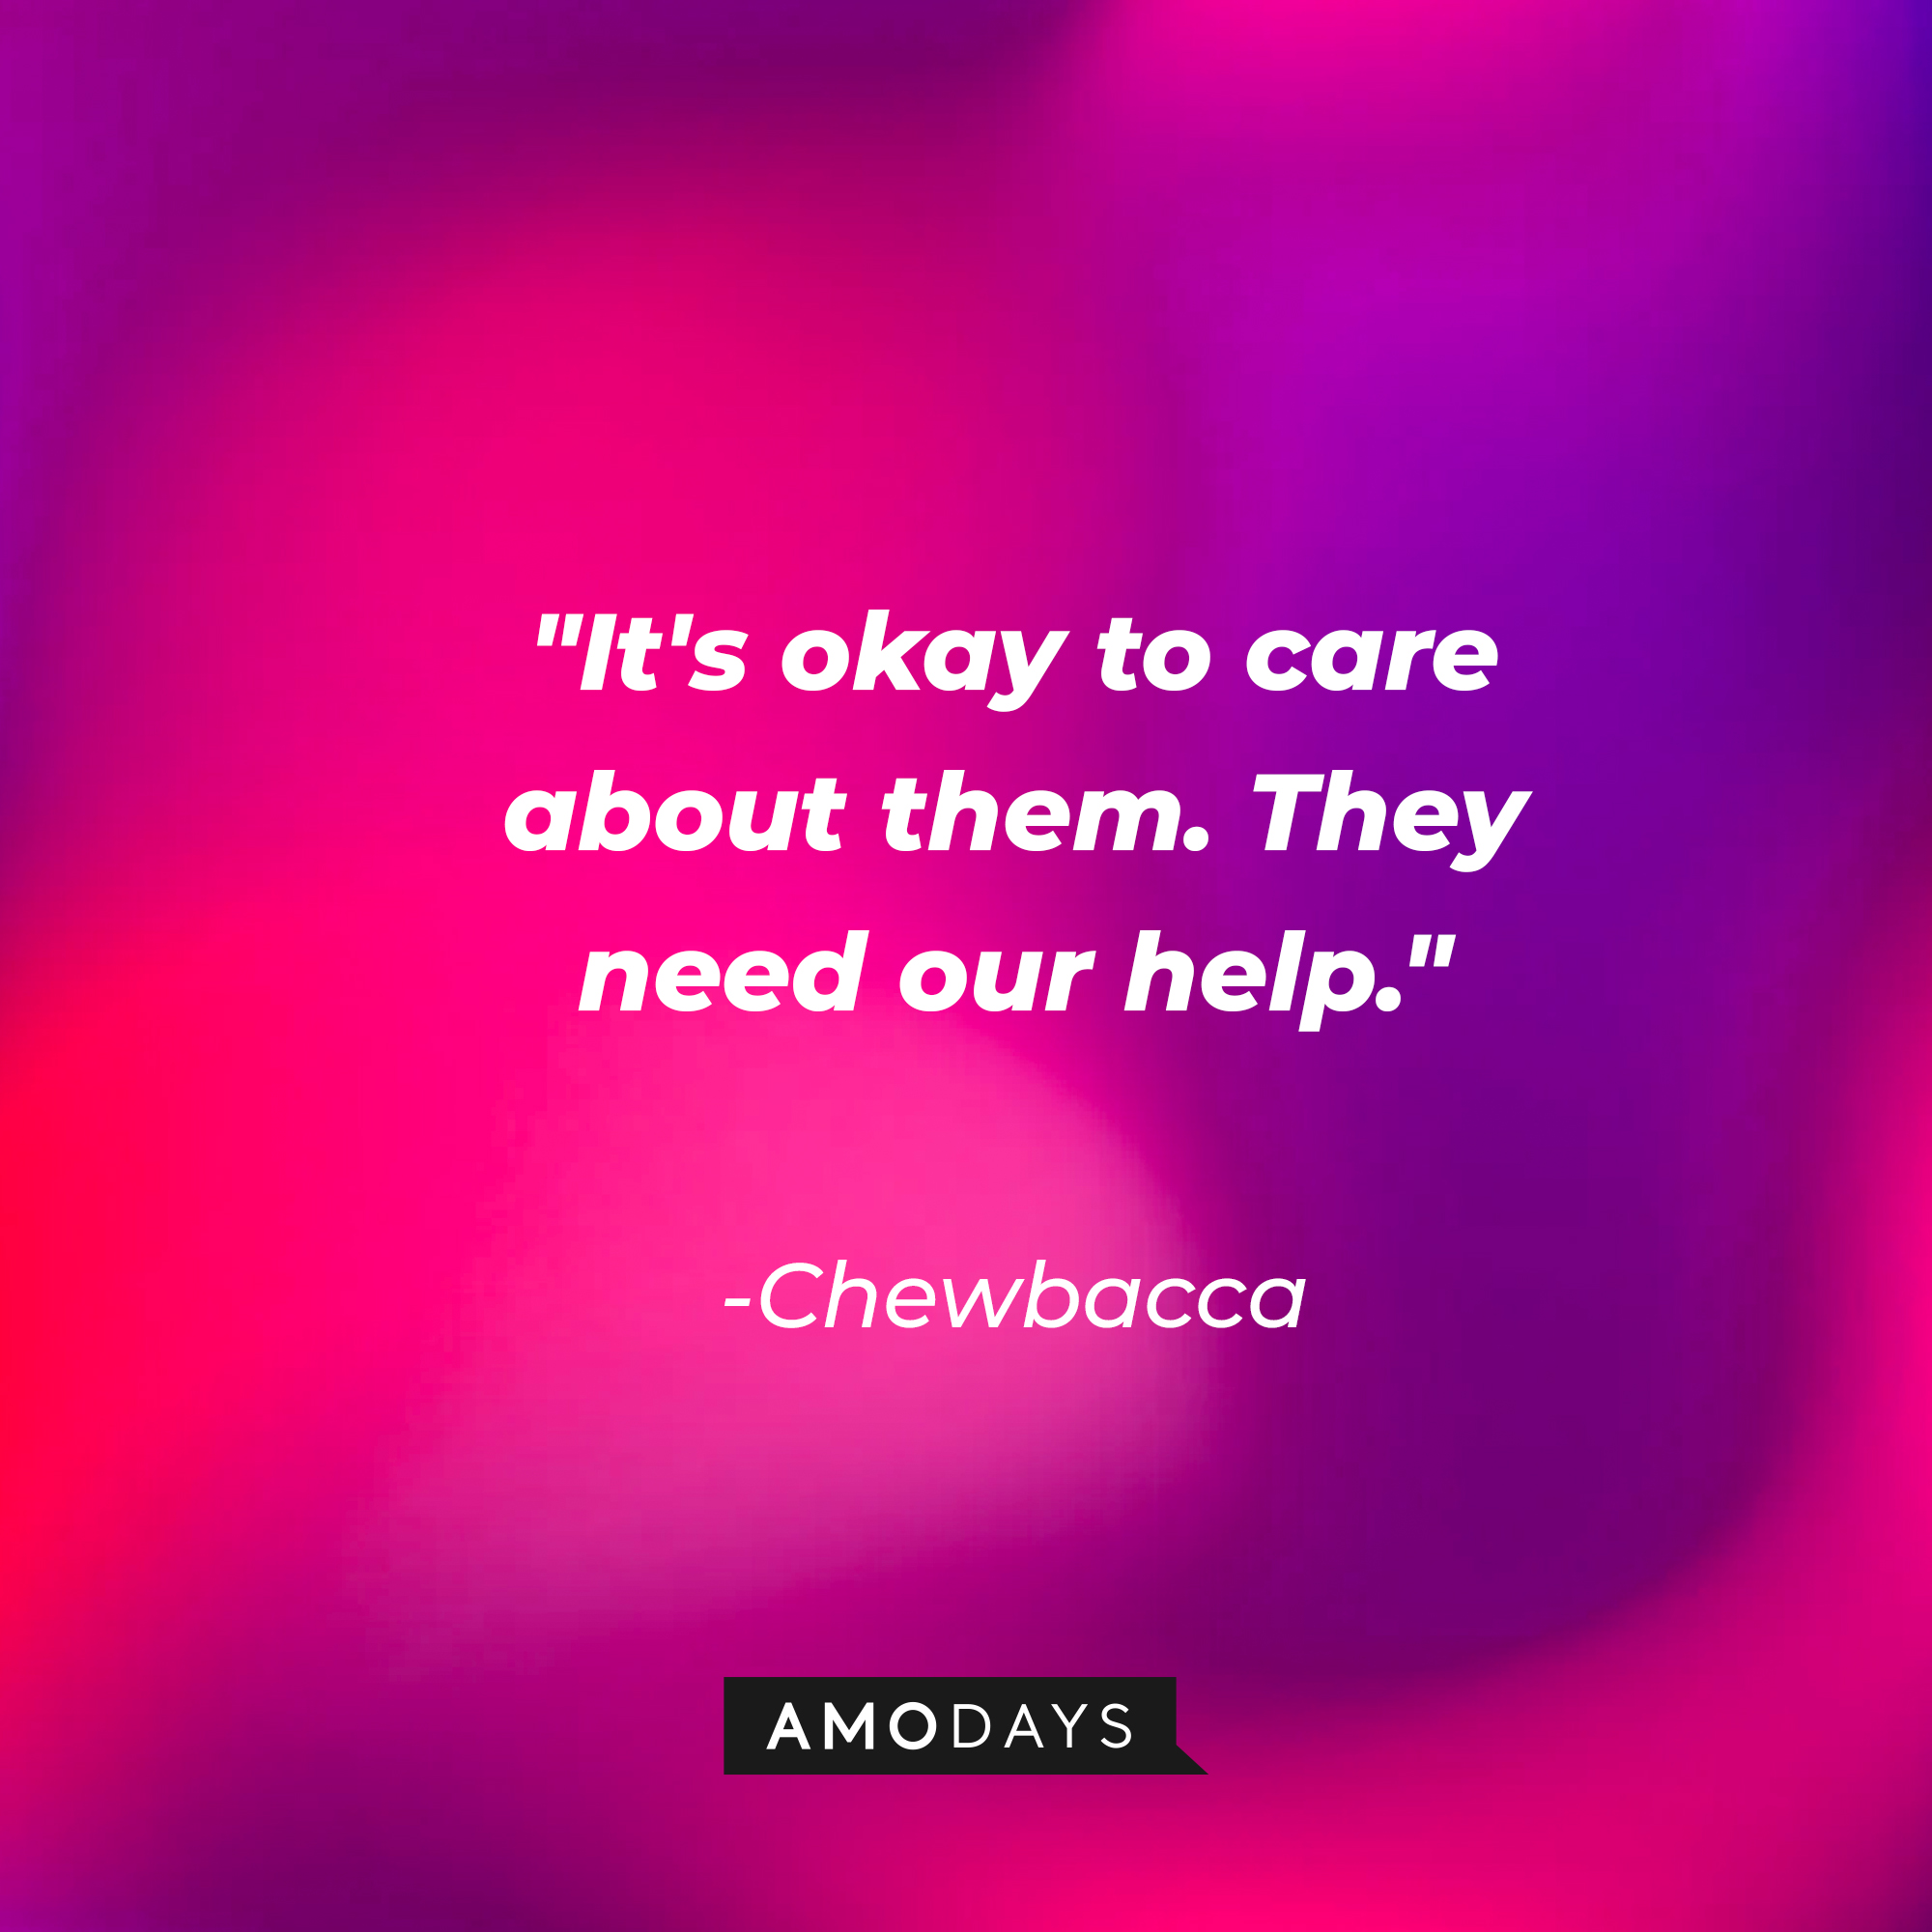 Chewbacca's quote: "It's okay to care about them. They need our help." | Source: AmoDays